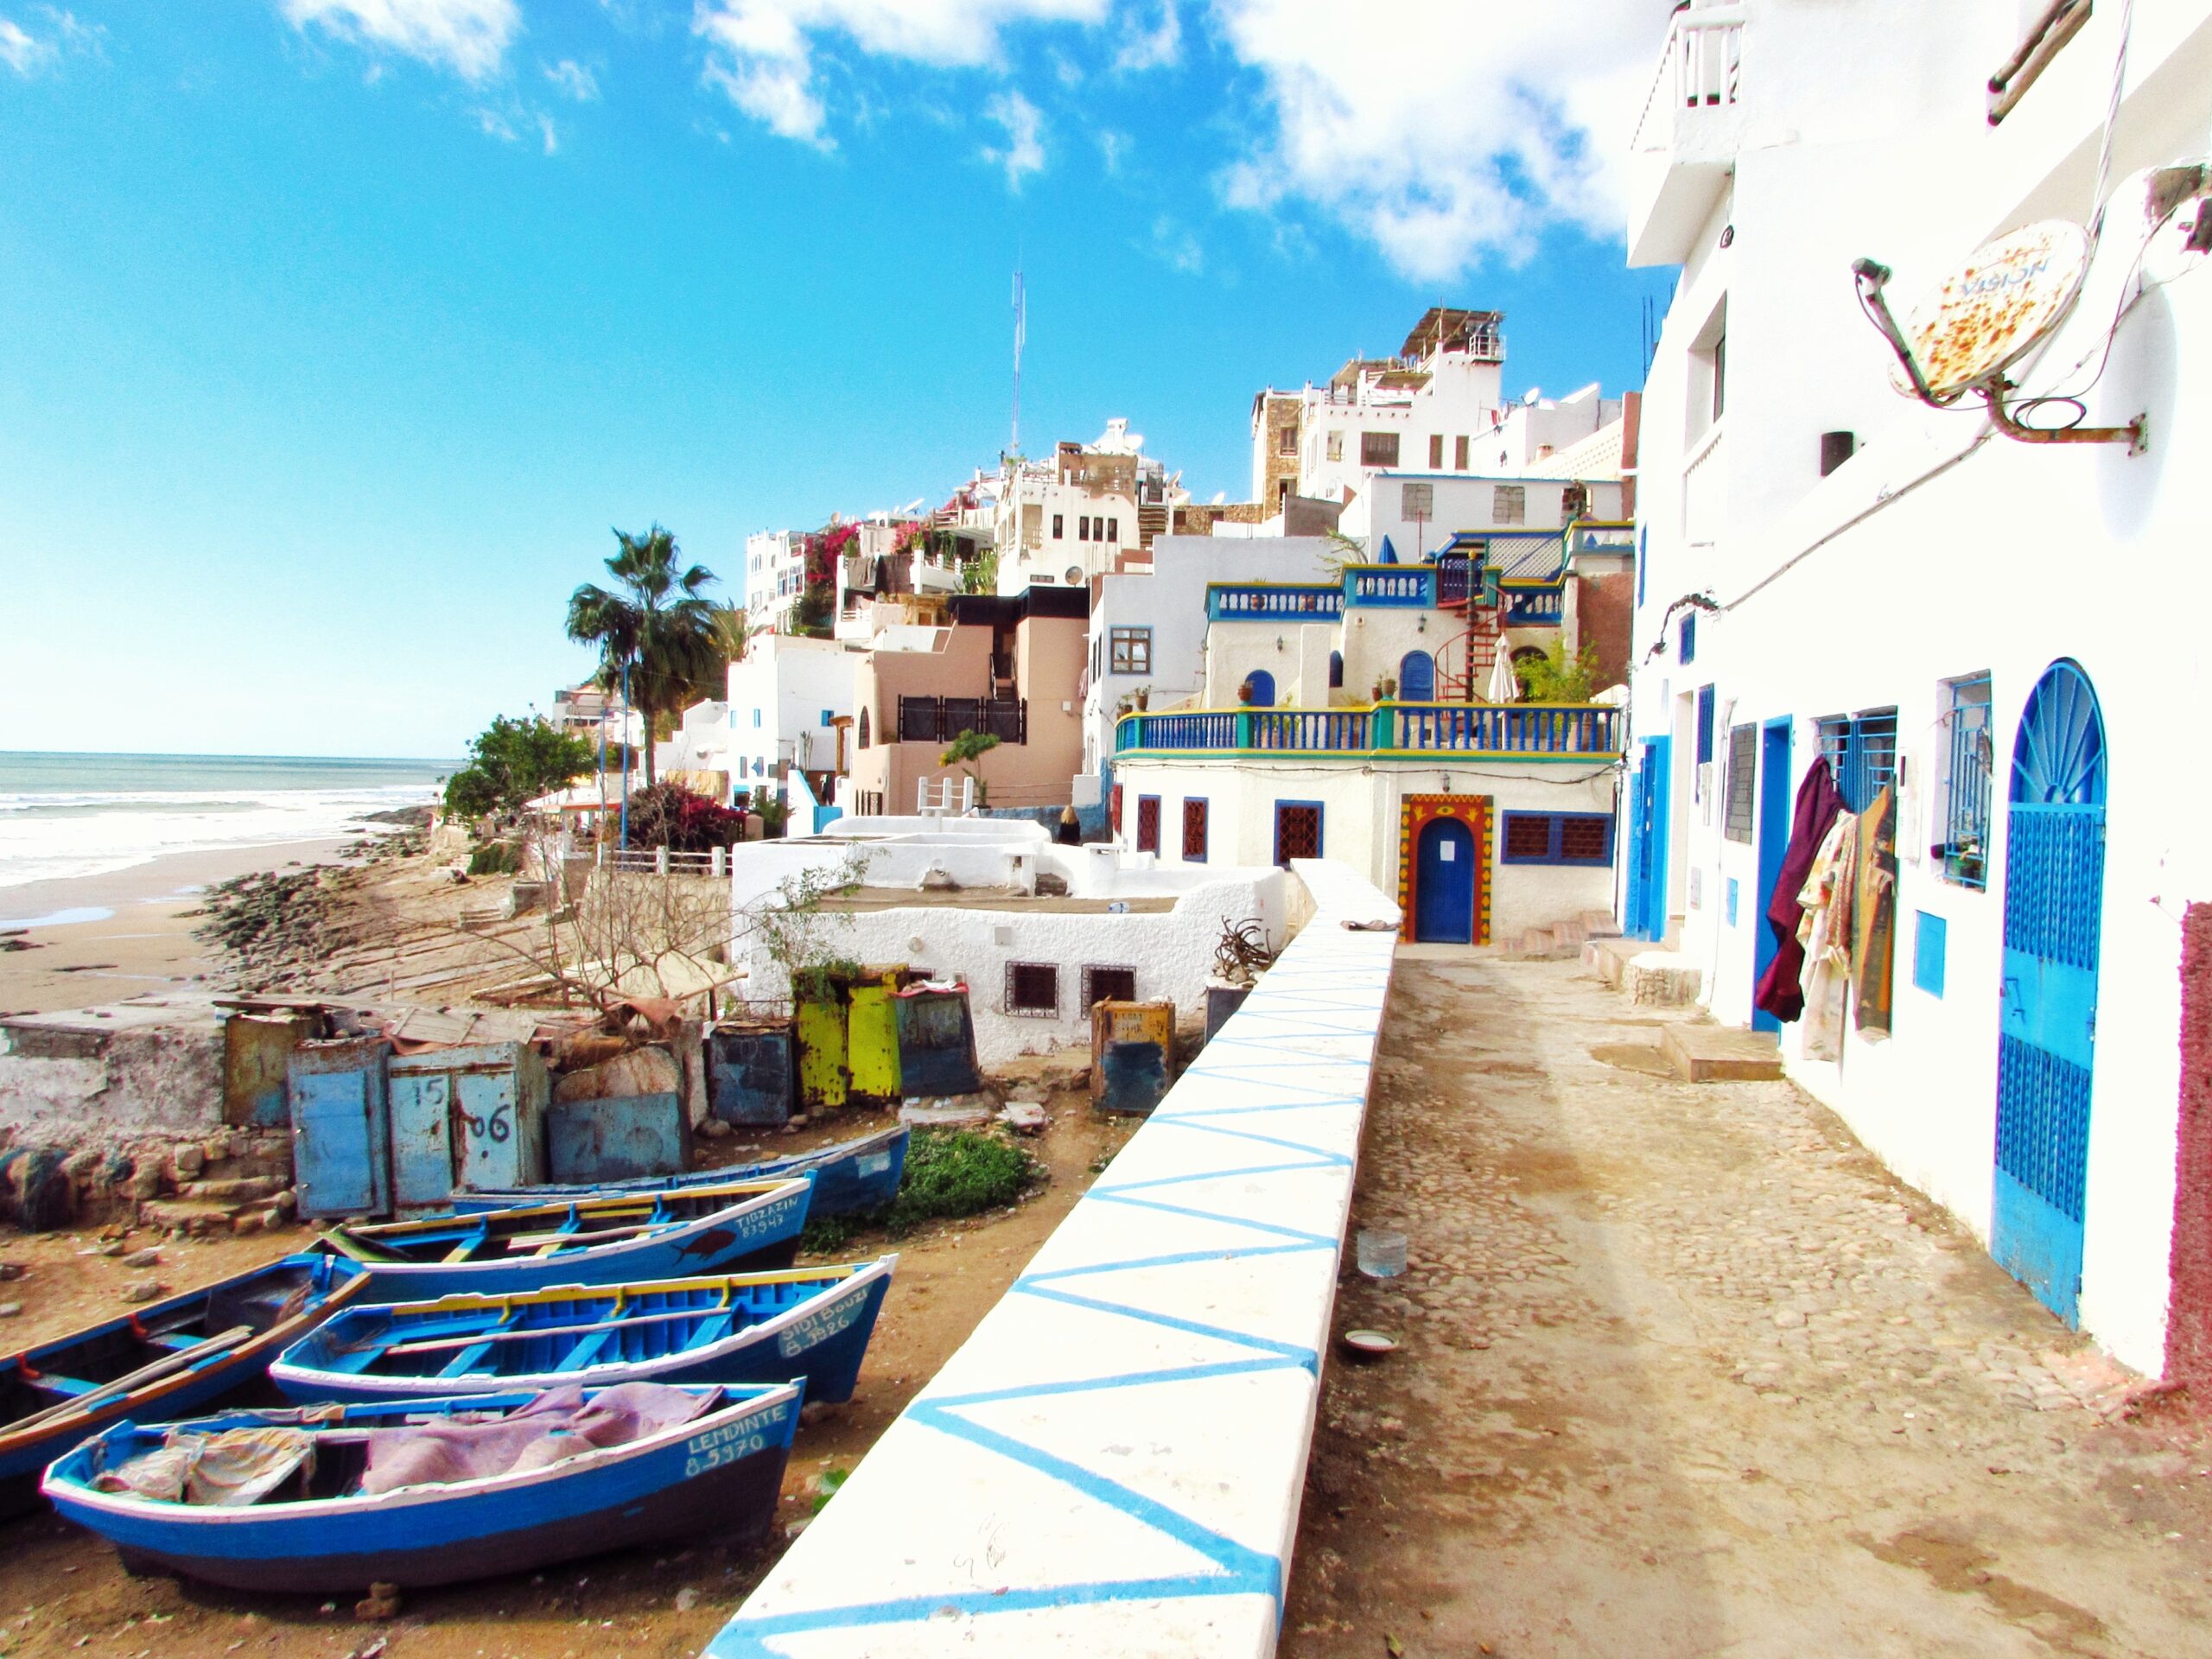 coastal area in Tangier for your Morocco honeymoon destinations